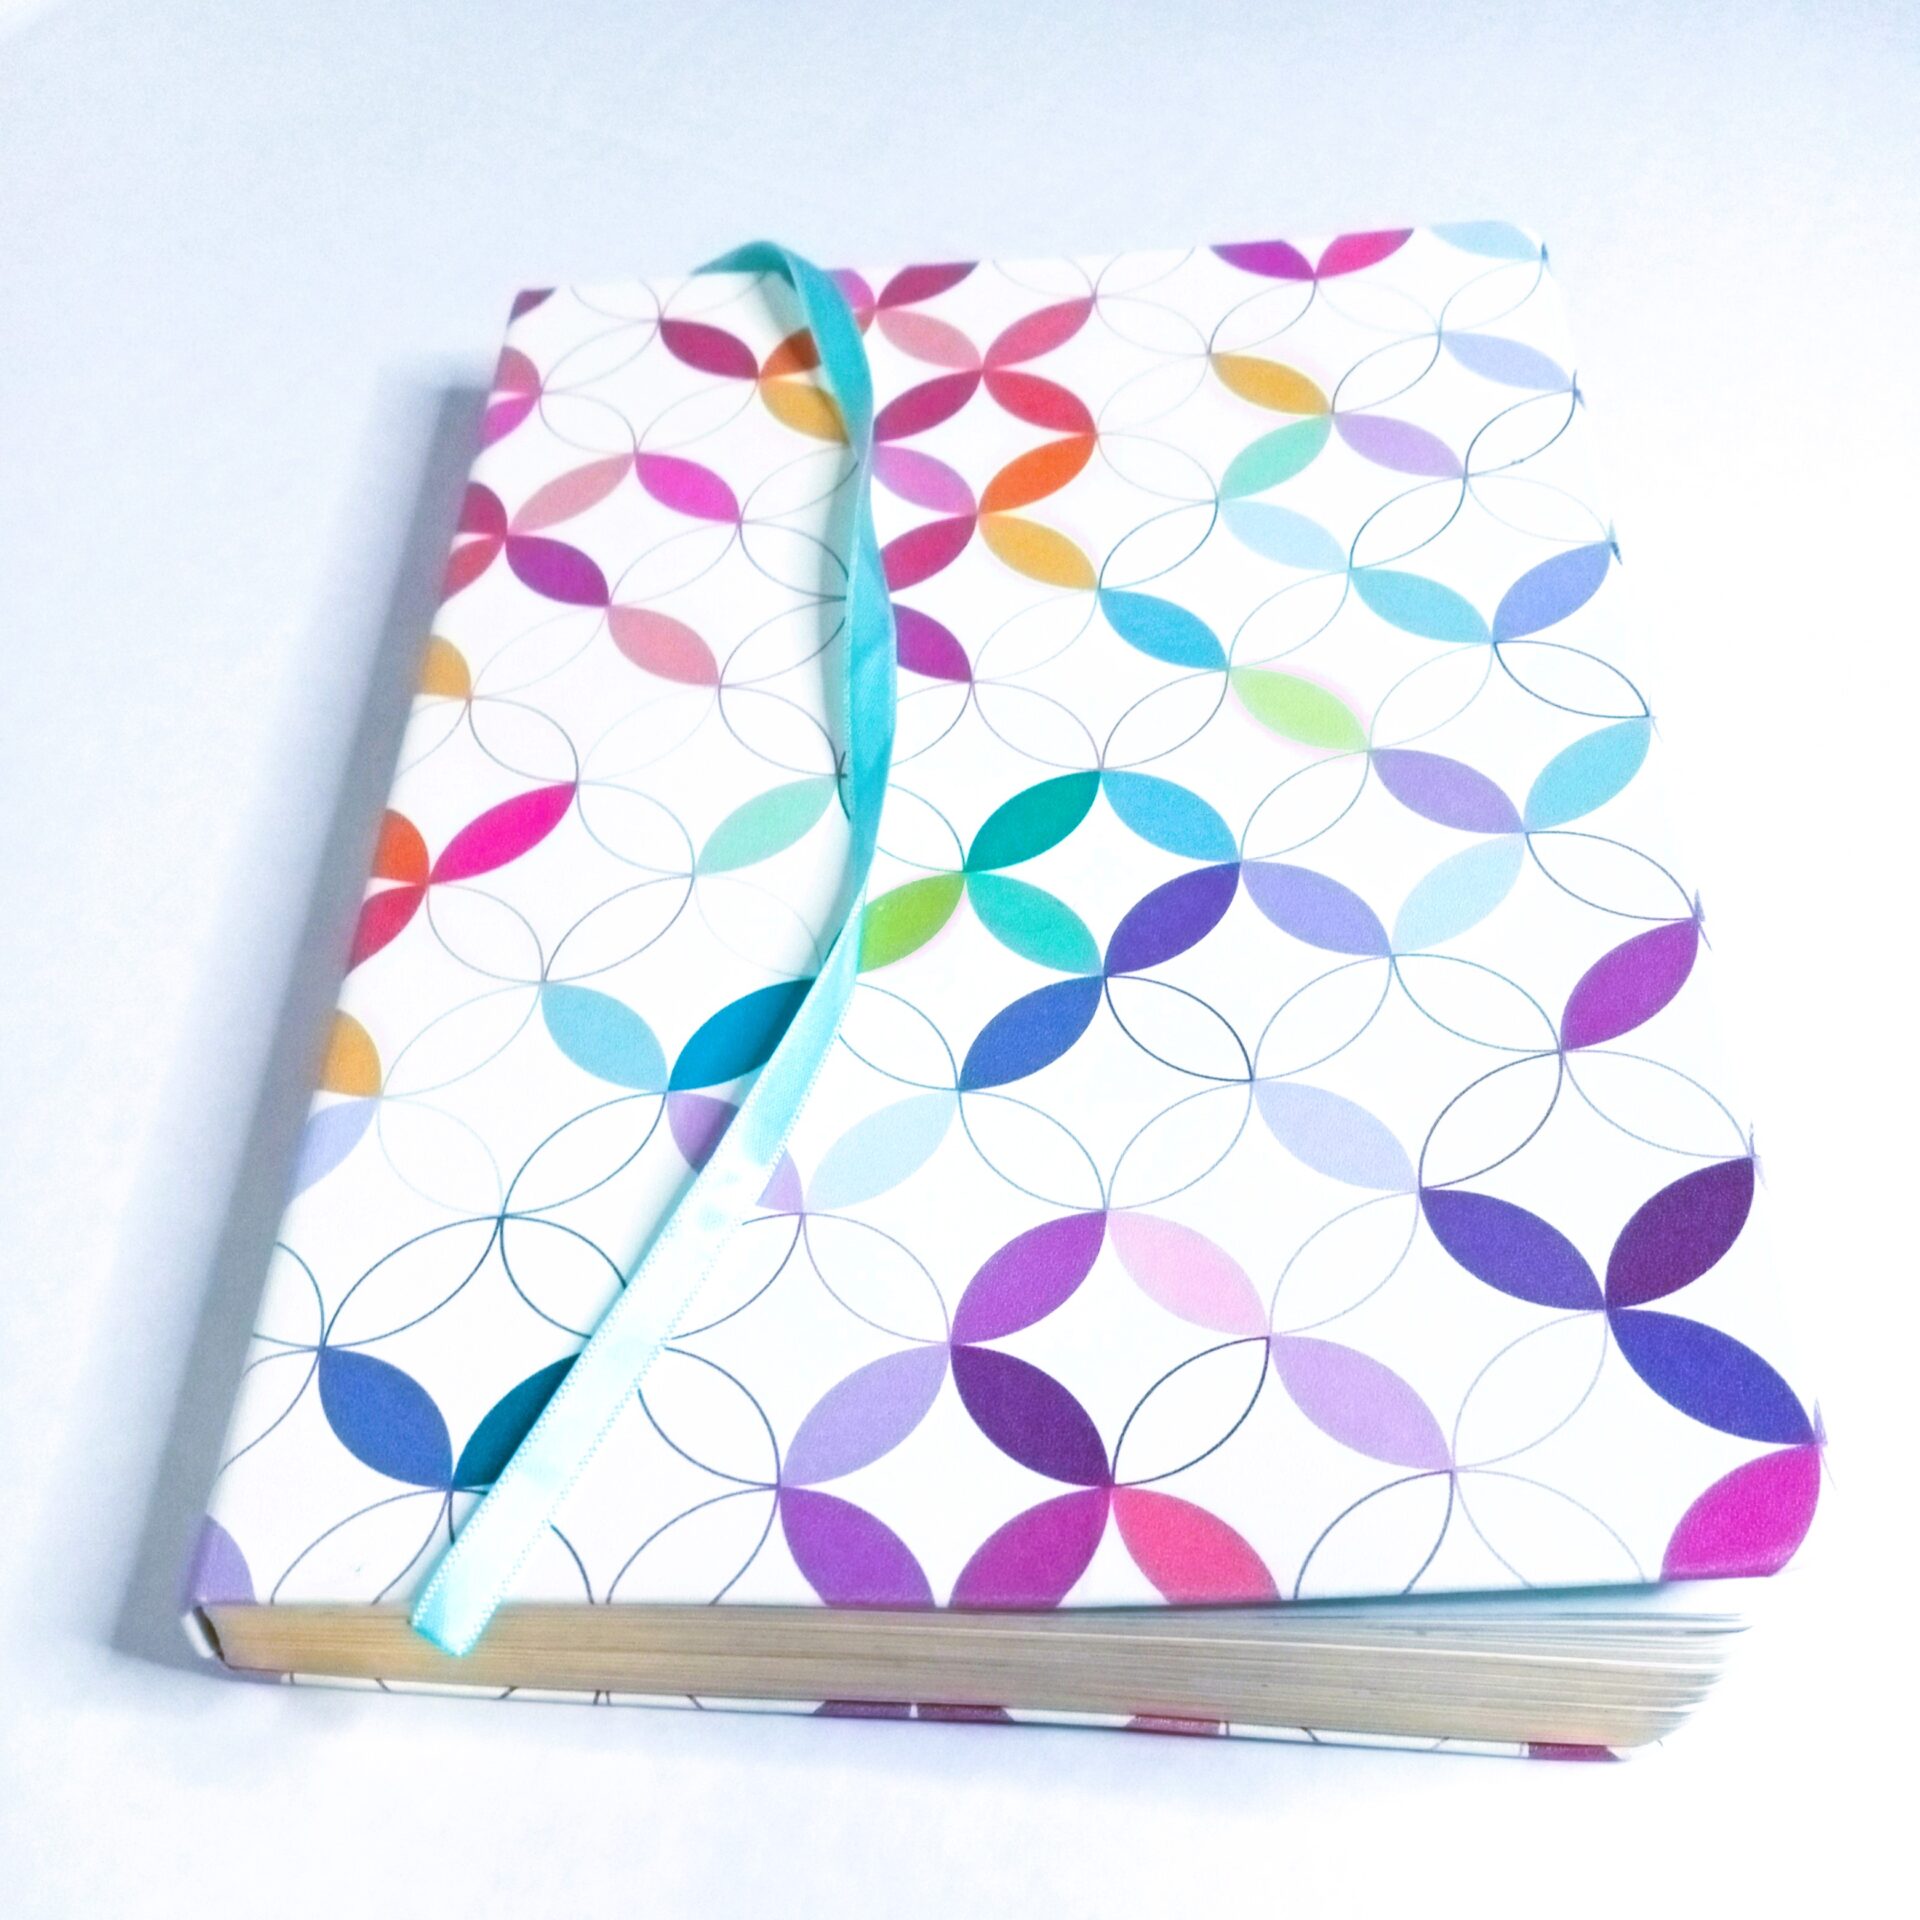 How to Use a Planner as a Reading Journal